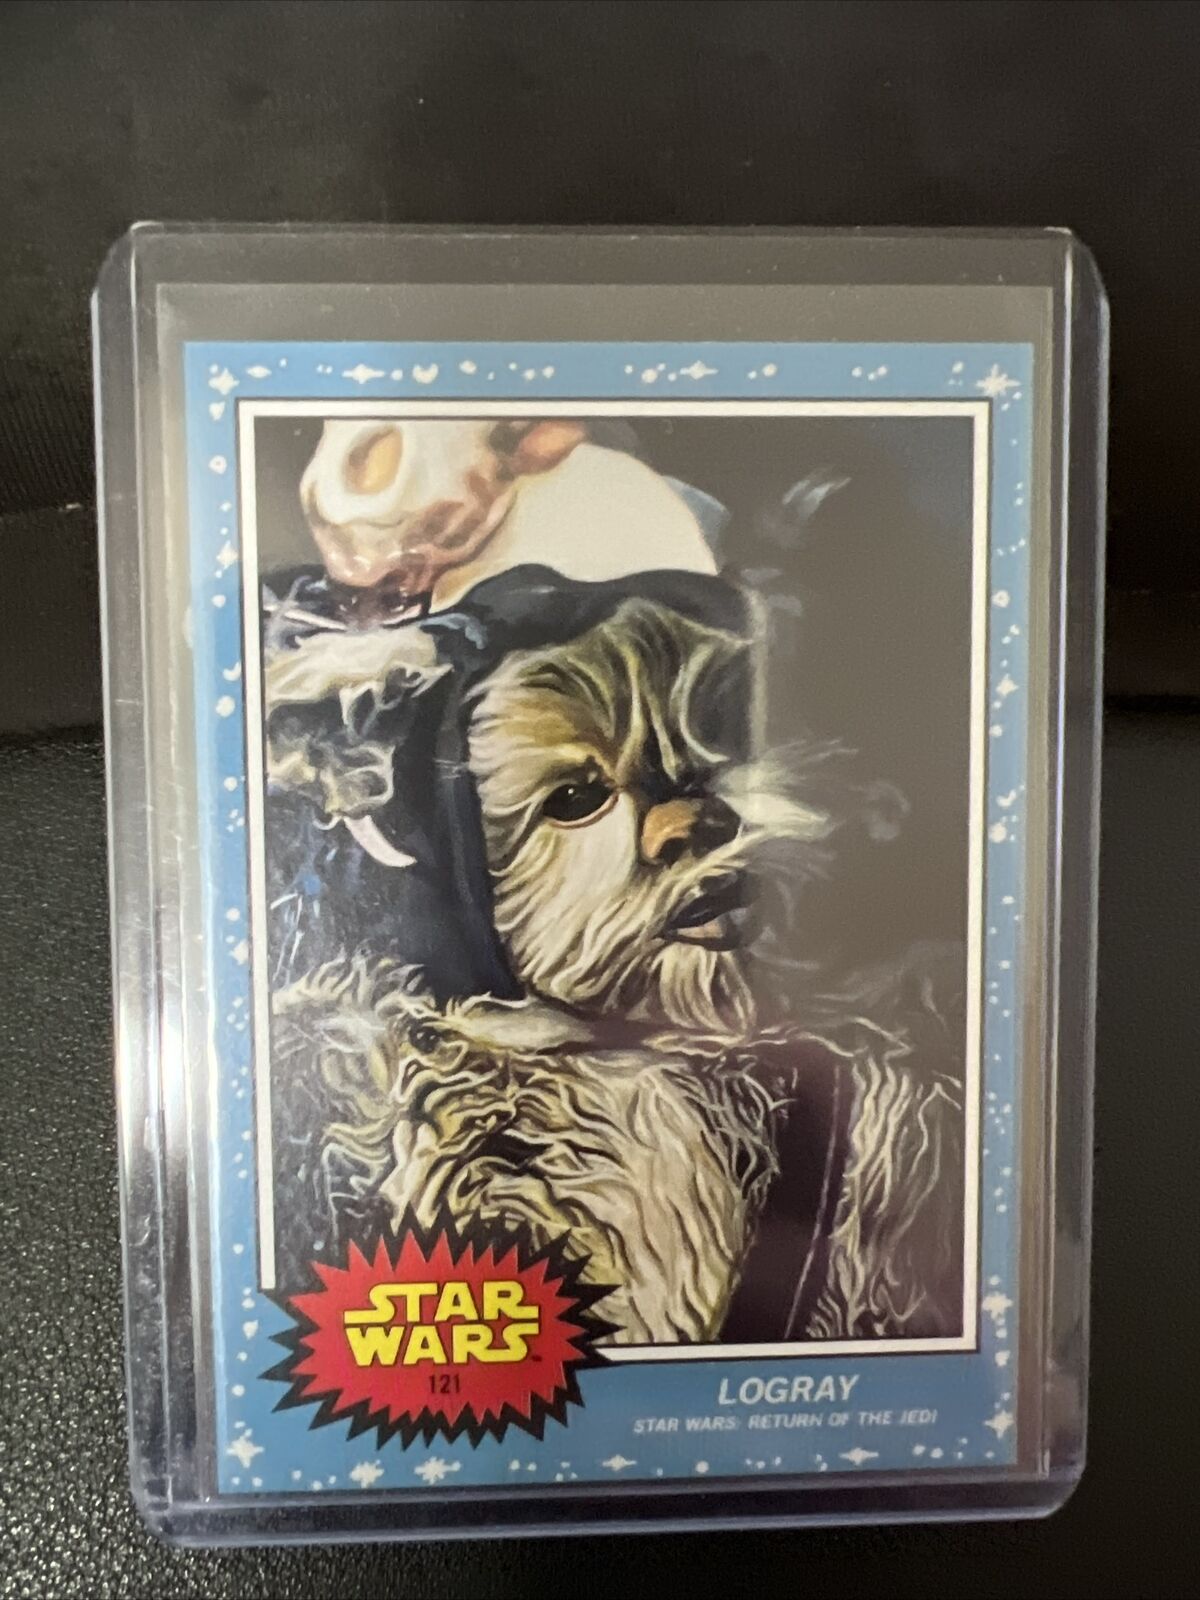 Logray 2020 Topps Star Wars Living Set Card The Return of the Jedi #121